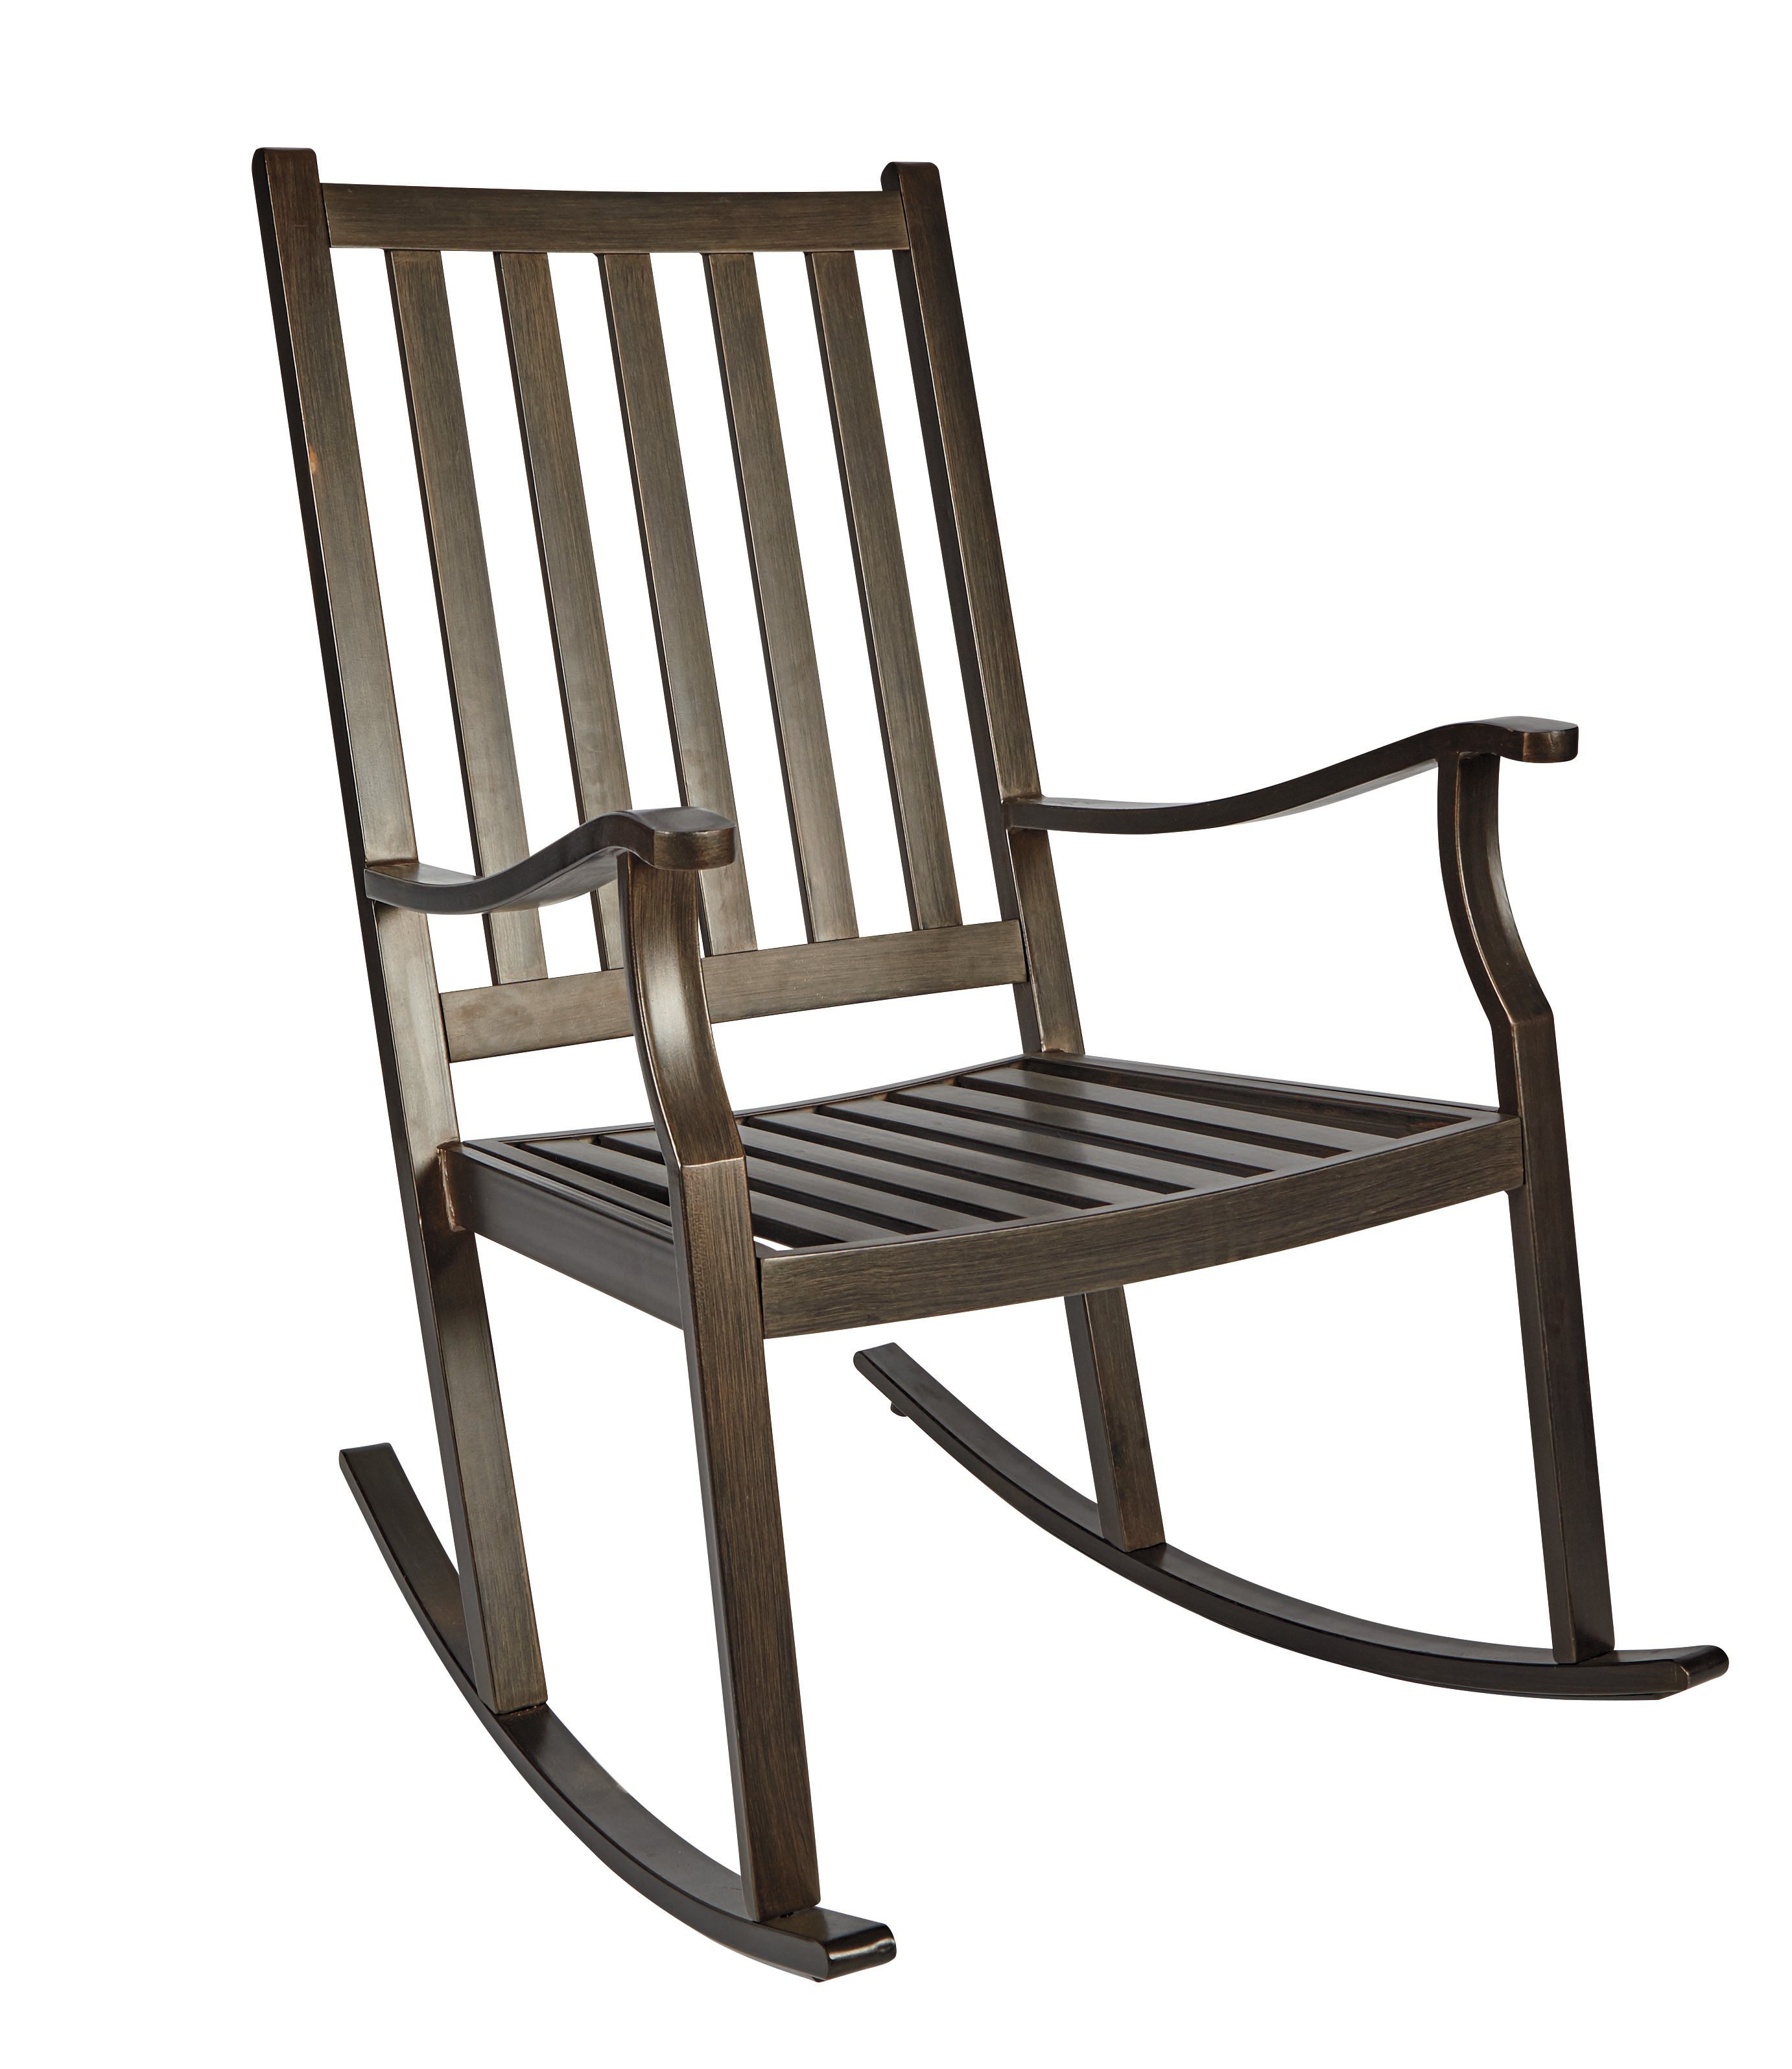 outdoor solutions steel rocking chair ‑ shop chairs